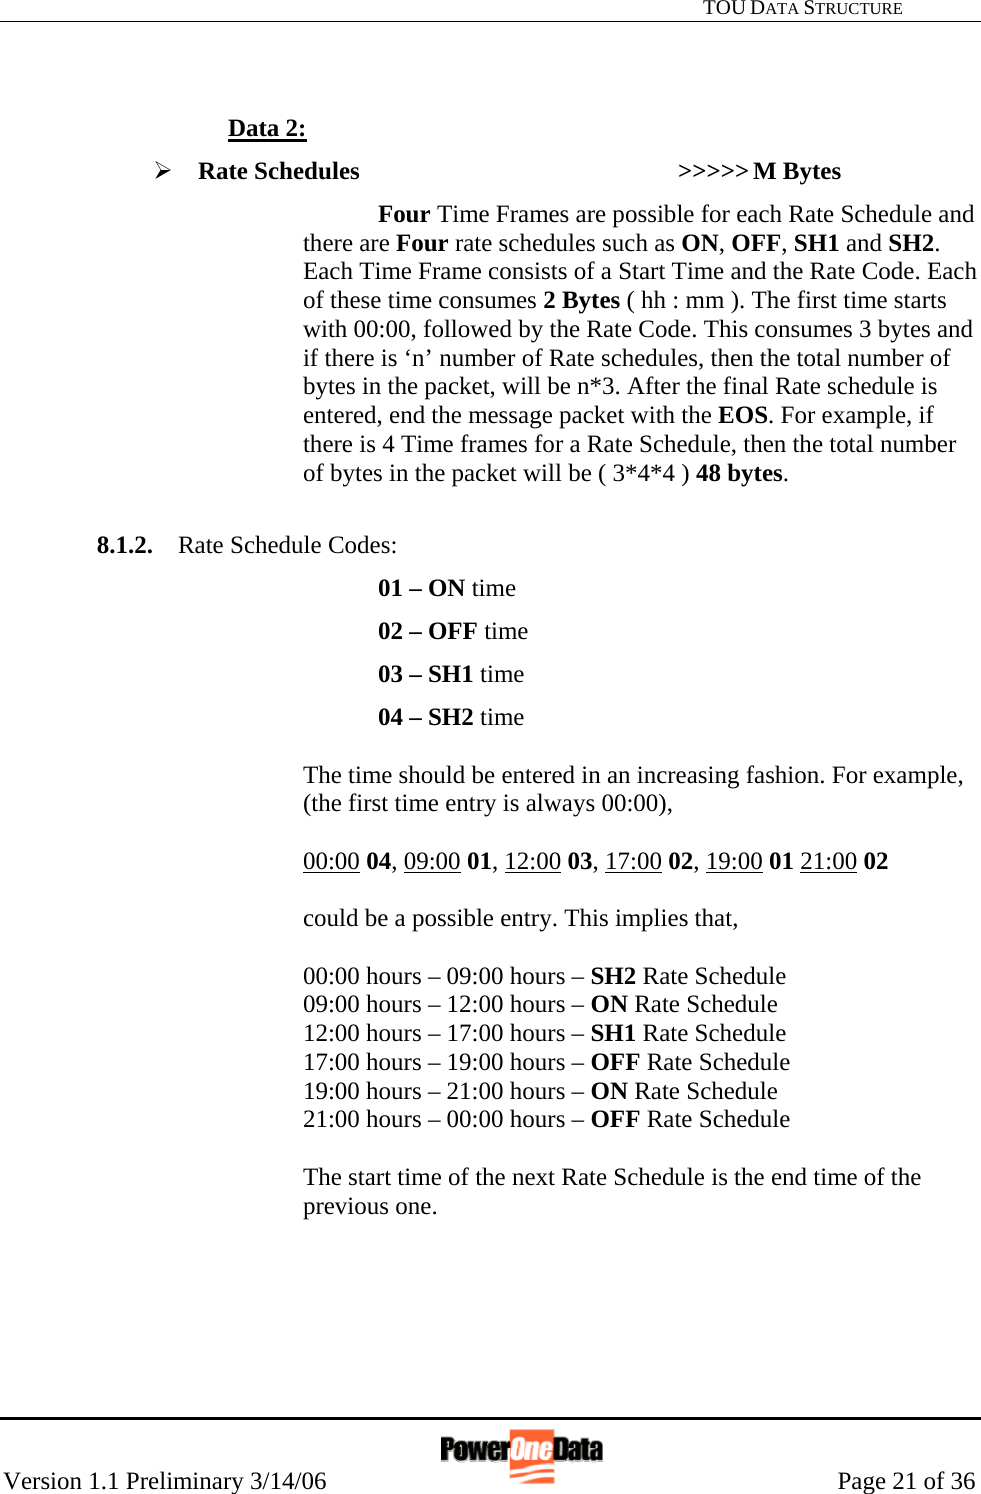   TOU DATA STRUCTURE Version 1.1 Preliminary 3/14/06                                                      Page 21 of 36     Data 2: ¾ Rate Schedules     &gt;&gt;&gt;&gt;&gt; M Bytes Four Time Frames are possible for each Rate Schedule and there are Four rate schedules such as ON, OFF, SH1 and SH2. Each Time Frame consists of a Start Time and the Rate Code. Each of these time consumes 2 Bytes ( hh : mm ). The first time starts with 00:00, followed by the Rate Code. This consumes 3 bytes and if there is ‘n’ number of Rate schedules, then the total number of bytes in the packet, will be n*3. After the final Rate schedule is entered, end the message packet with the EOS. For example, if there is 4 Time frames for a Rate Schedule, then the total number of bytes in the packet will be ( 3*4*4 ) 48 bytes.   8.1.2.  Rate Schedule Codes: 01 – ON time  02 – OFF time 03 – SH1 time 04 – SH2 time  The time should be entered in an increasing fashion. For example, (the first time entry is always 00:00),  00:00 04, 09:00 01, 12:00 03, 17:00 02, 19:00 01 21:00 02   could be a possible entry. This implies that,   00:00 hours – 09:00 hours – SH2 Rate Schedule 09:00 hours – 12:00 hours – ON Rate Schedule 12:00 hours – 17:00 hours – SH1 Rate Schedule 17:00 hours – 19:00 hours – OFF Rate Schedule 19:00 hours – 21:00 hours – ON Rate Schedule  21:00 hours – 00:00 hours – OFF Rate Schedule  The start time of the next Rate Schedule is the end time of the previous one.        